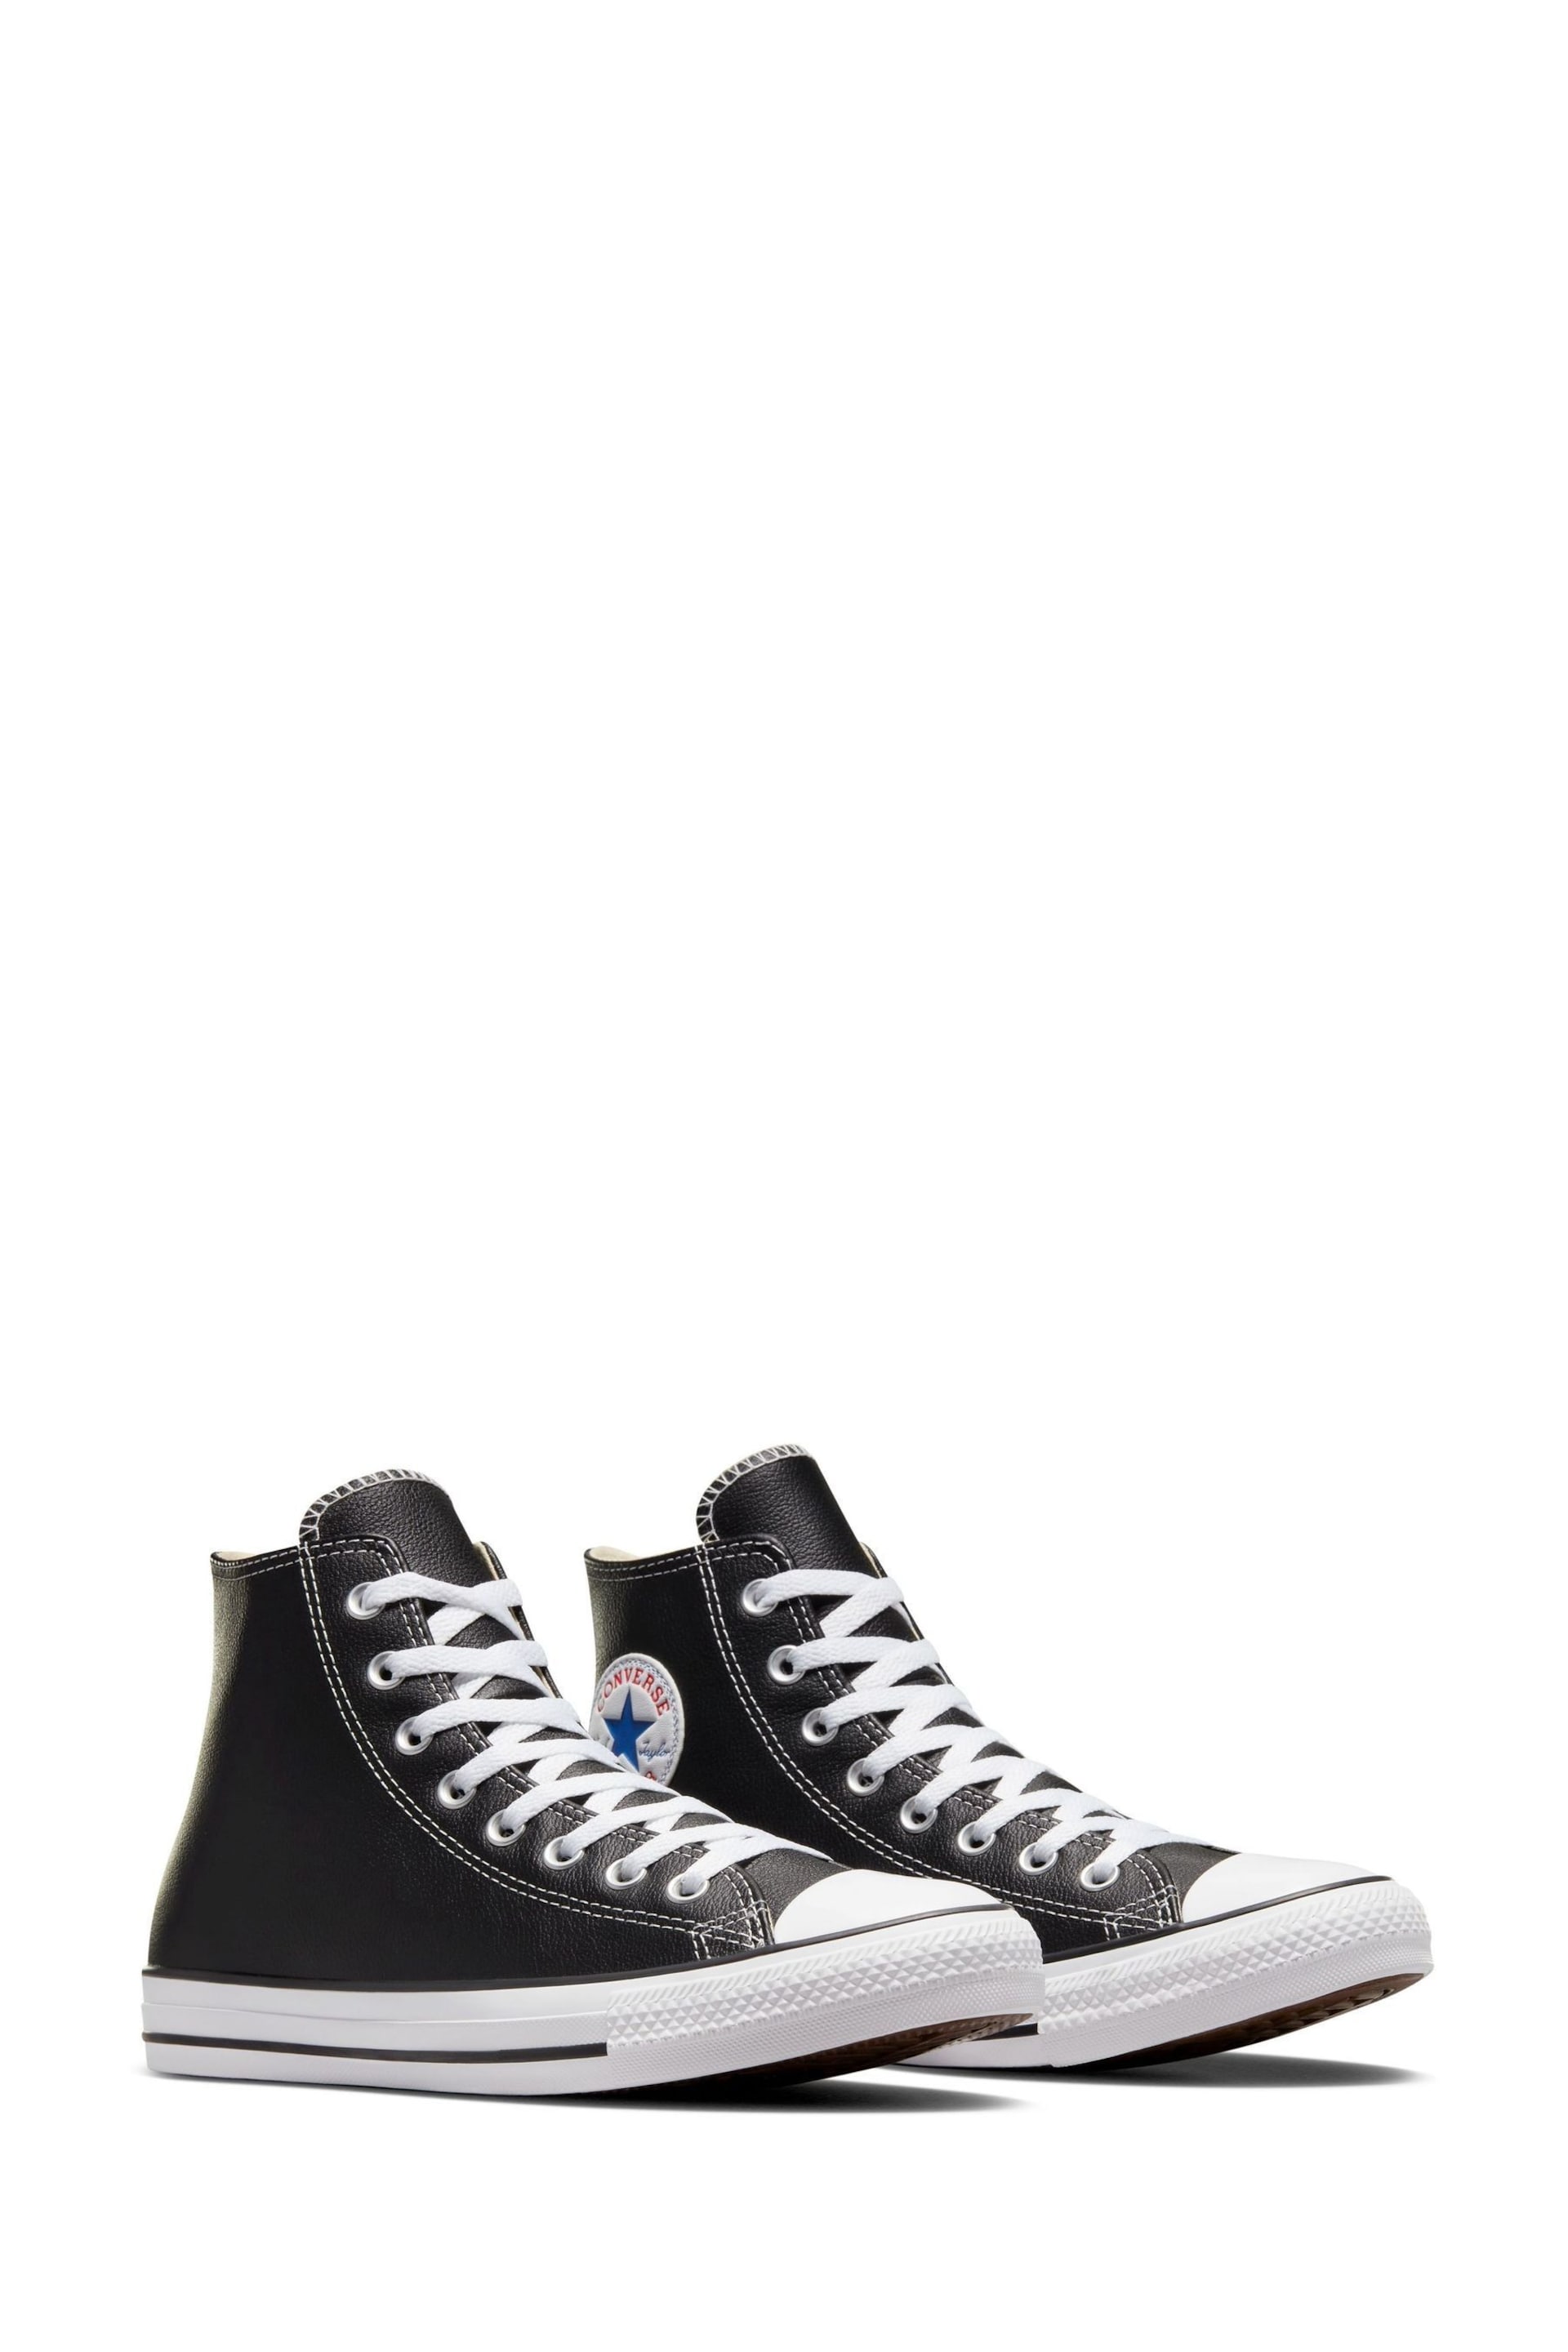 Converse Black Leather Chuck Taylor All Star High Top Trainers - Image 7 of 11